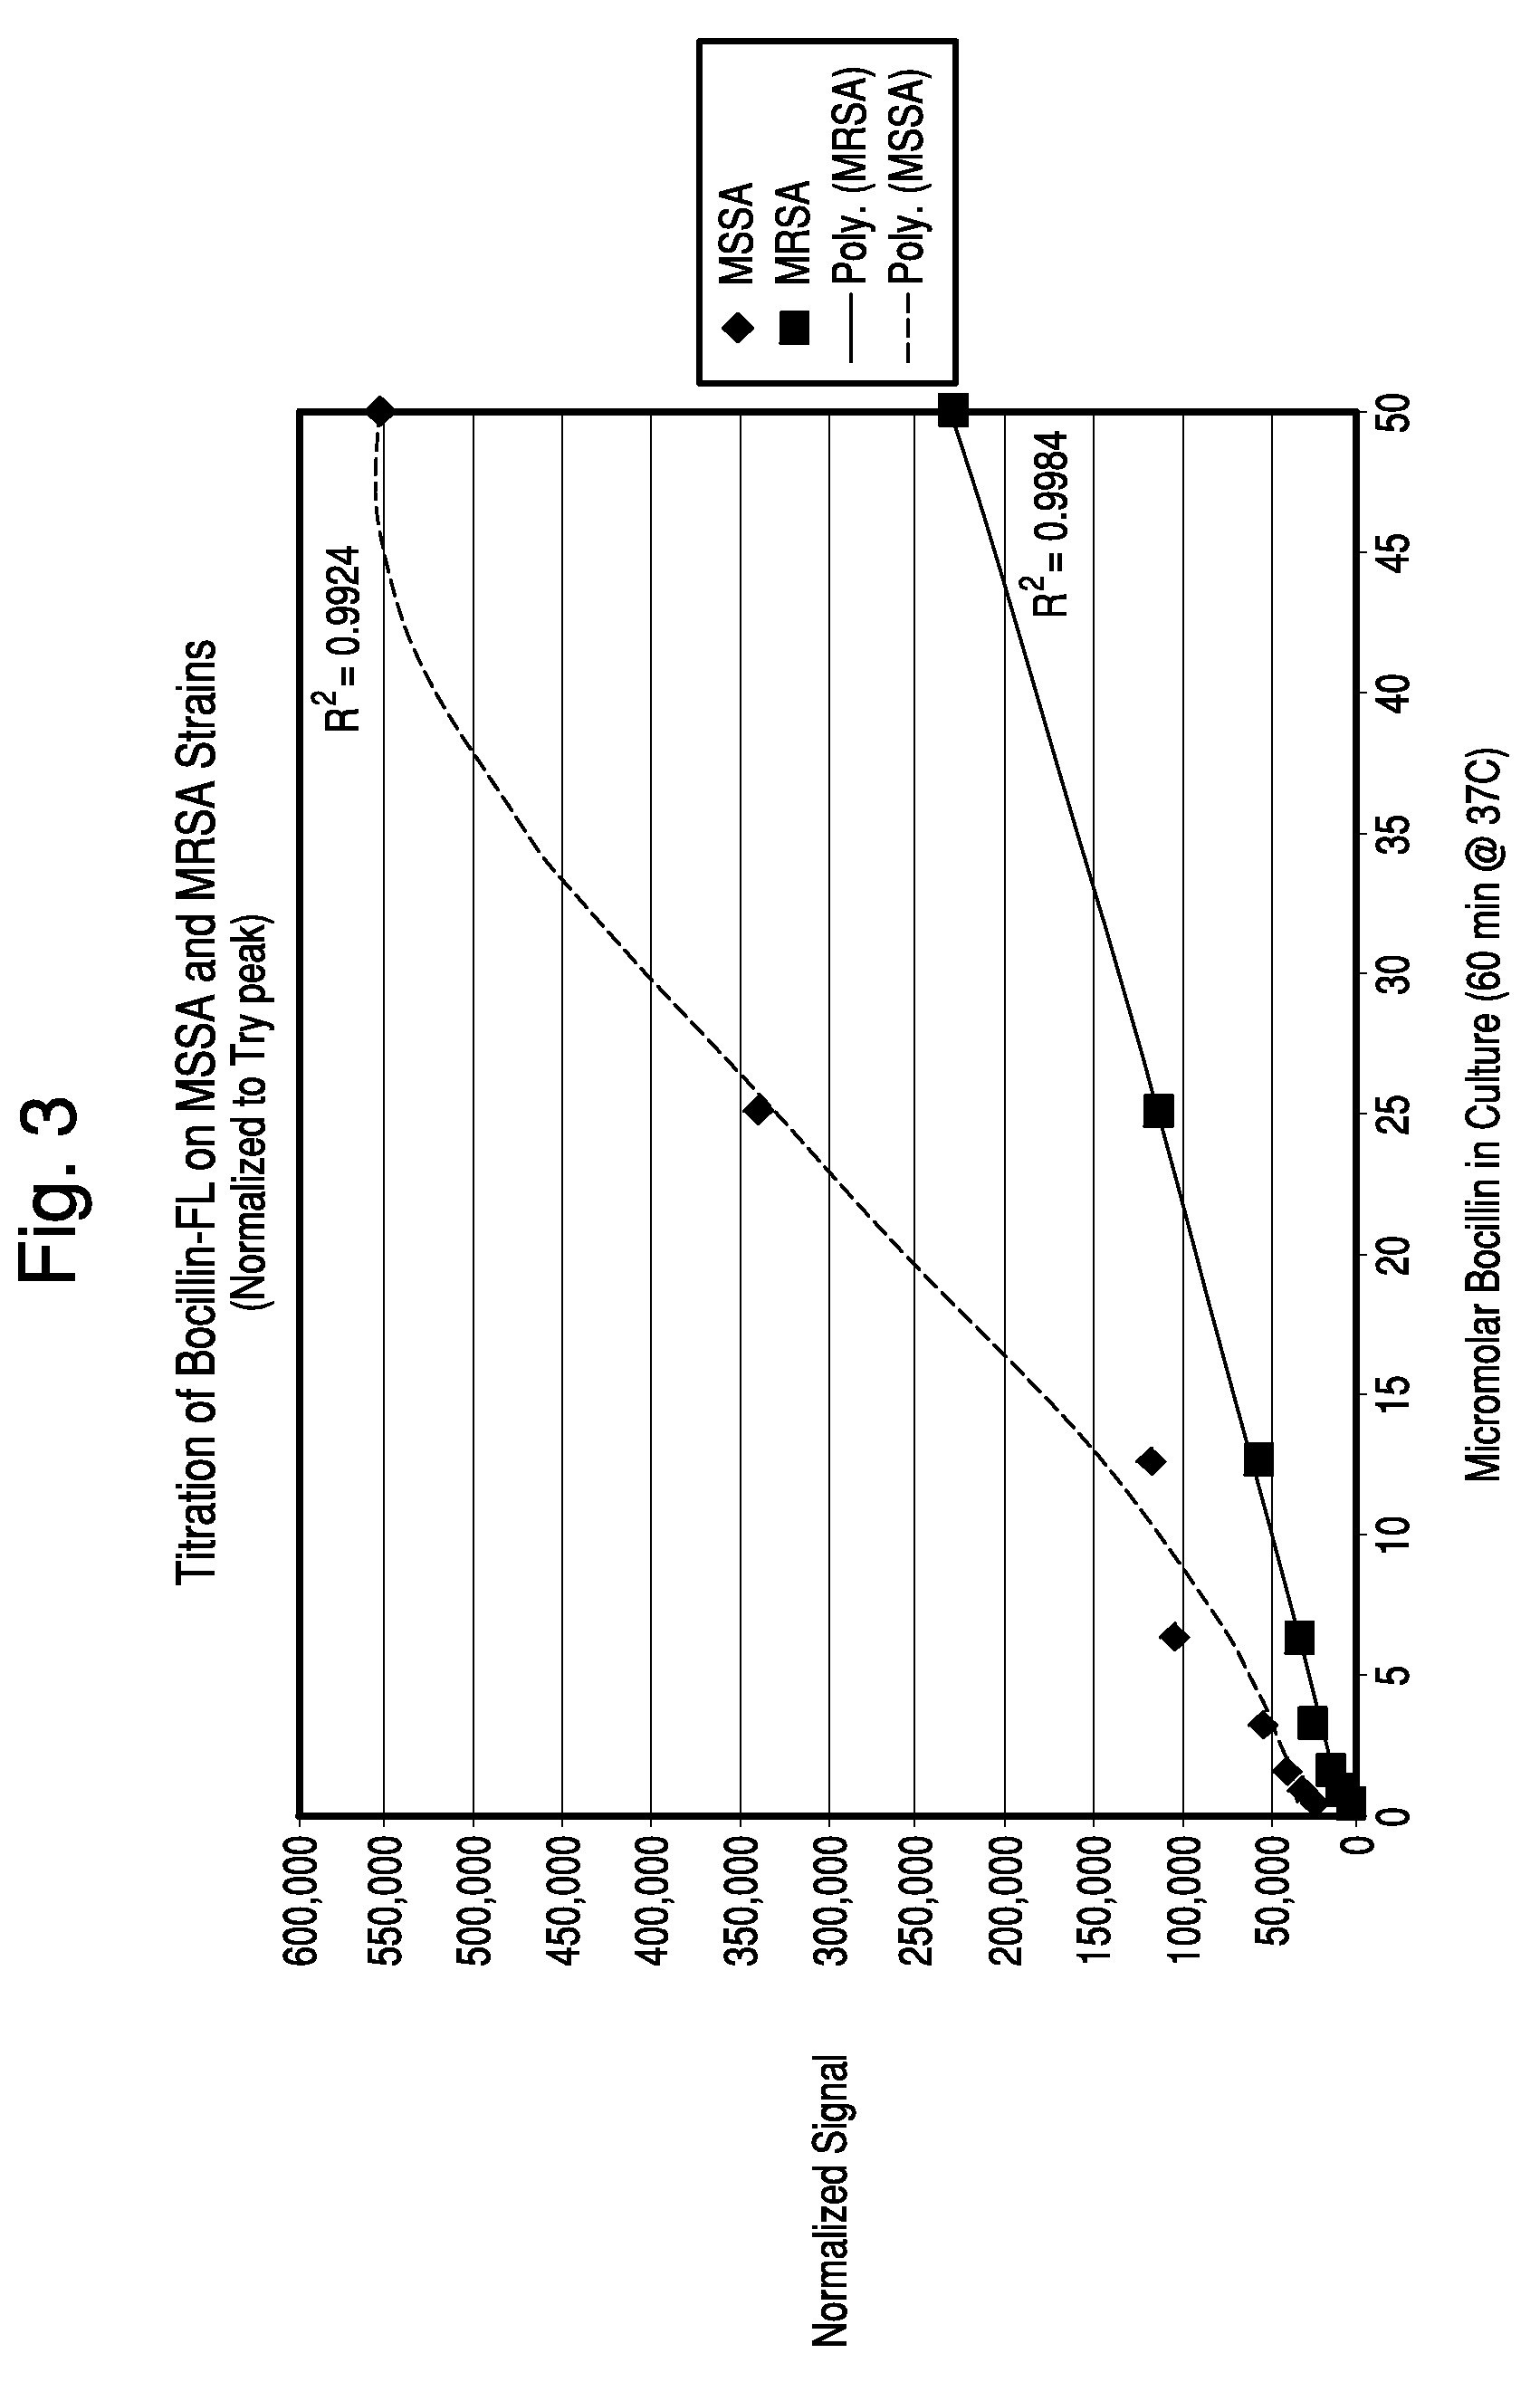 Methods for Antimicrobial Resistance Determination